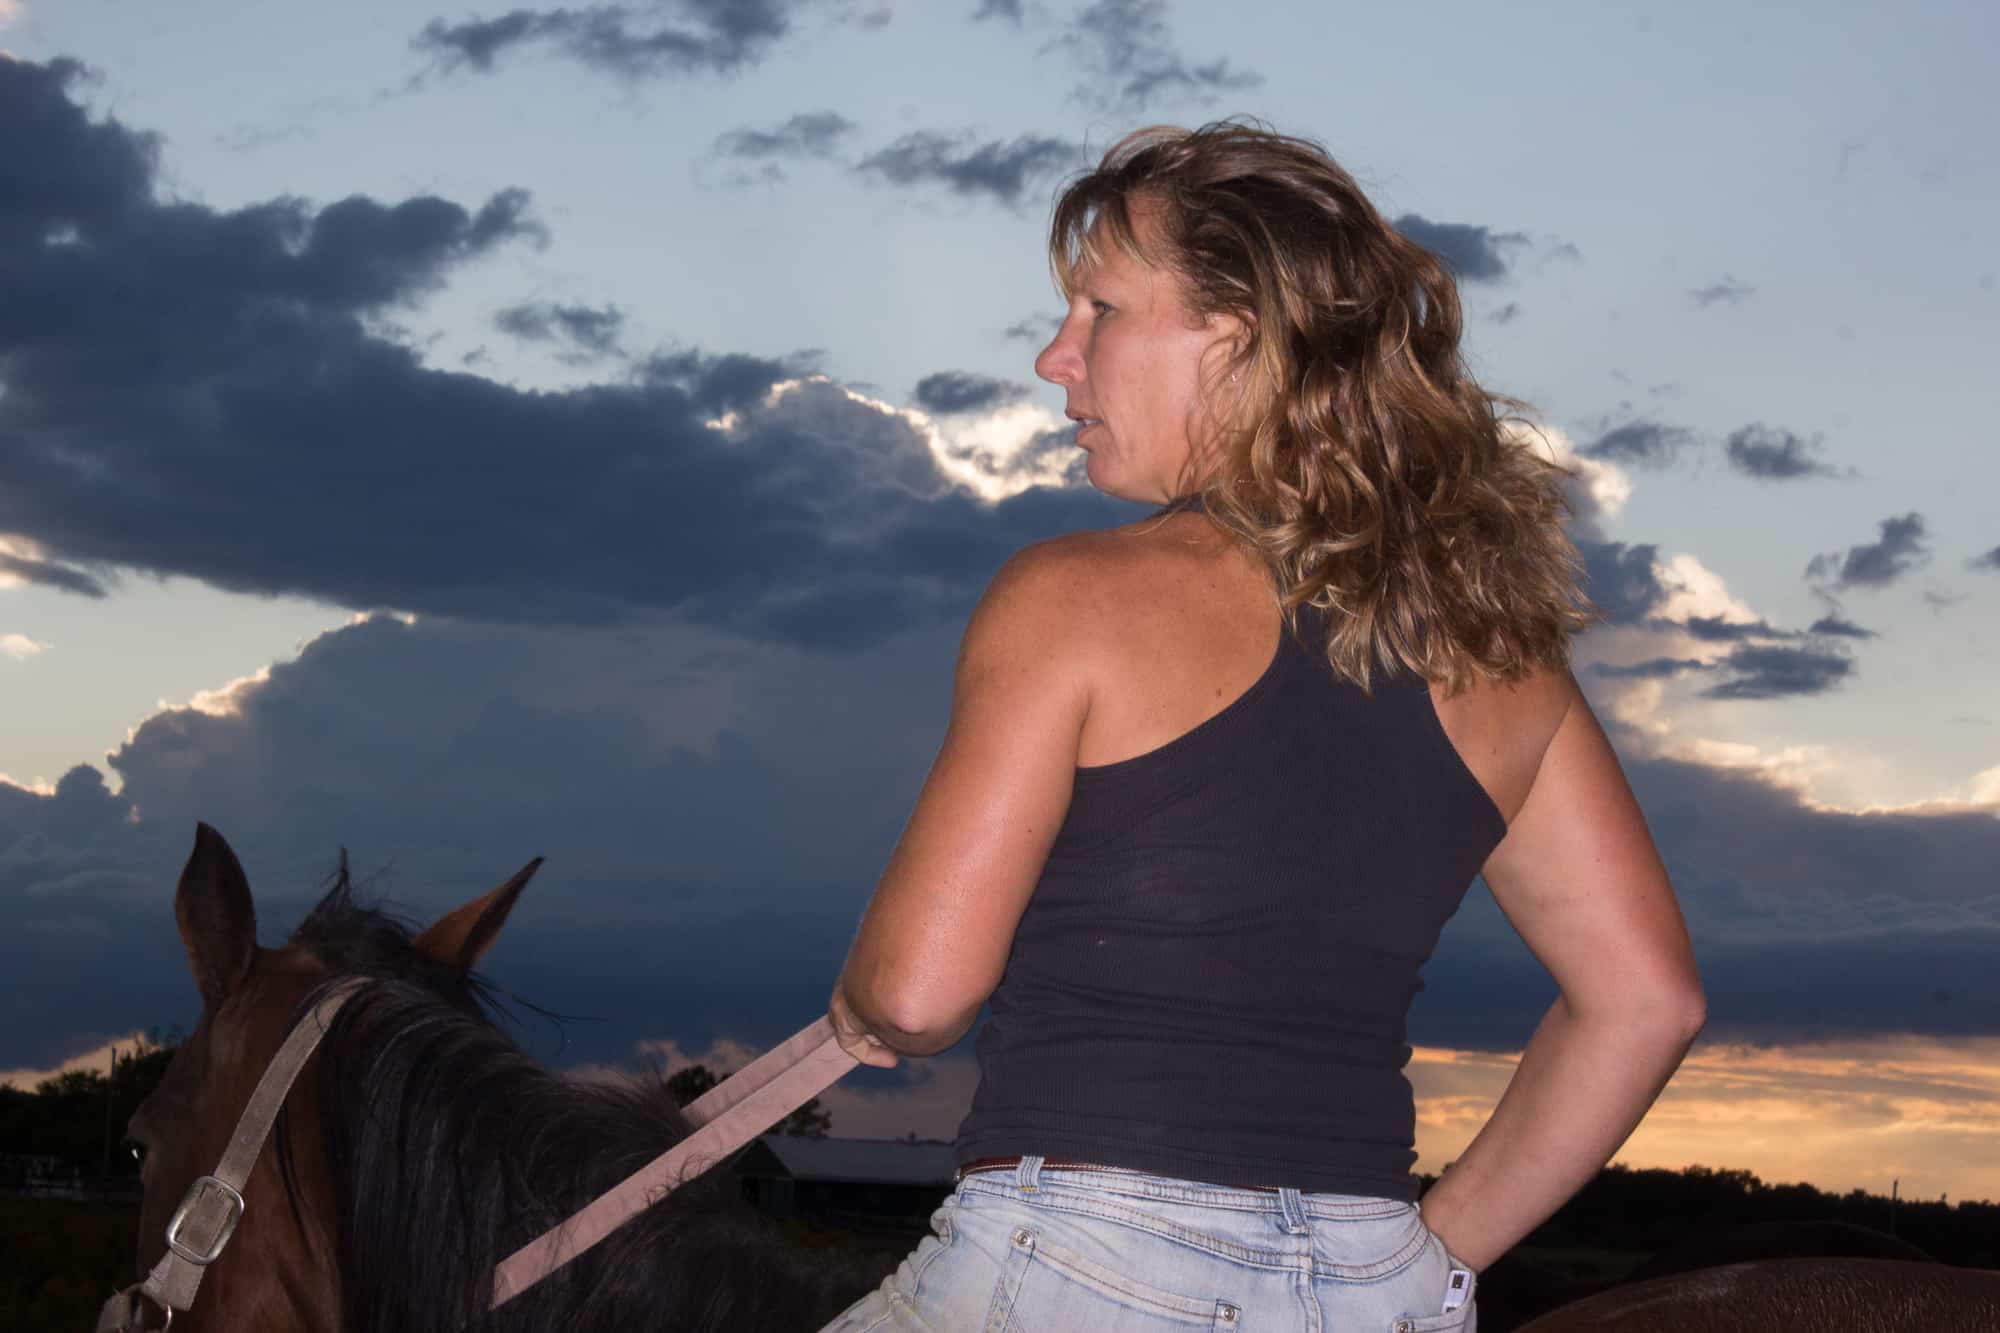 A woman ranch owner trains horses.